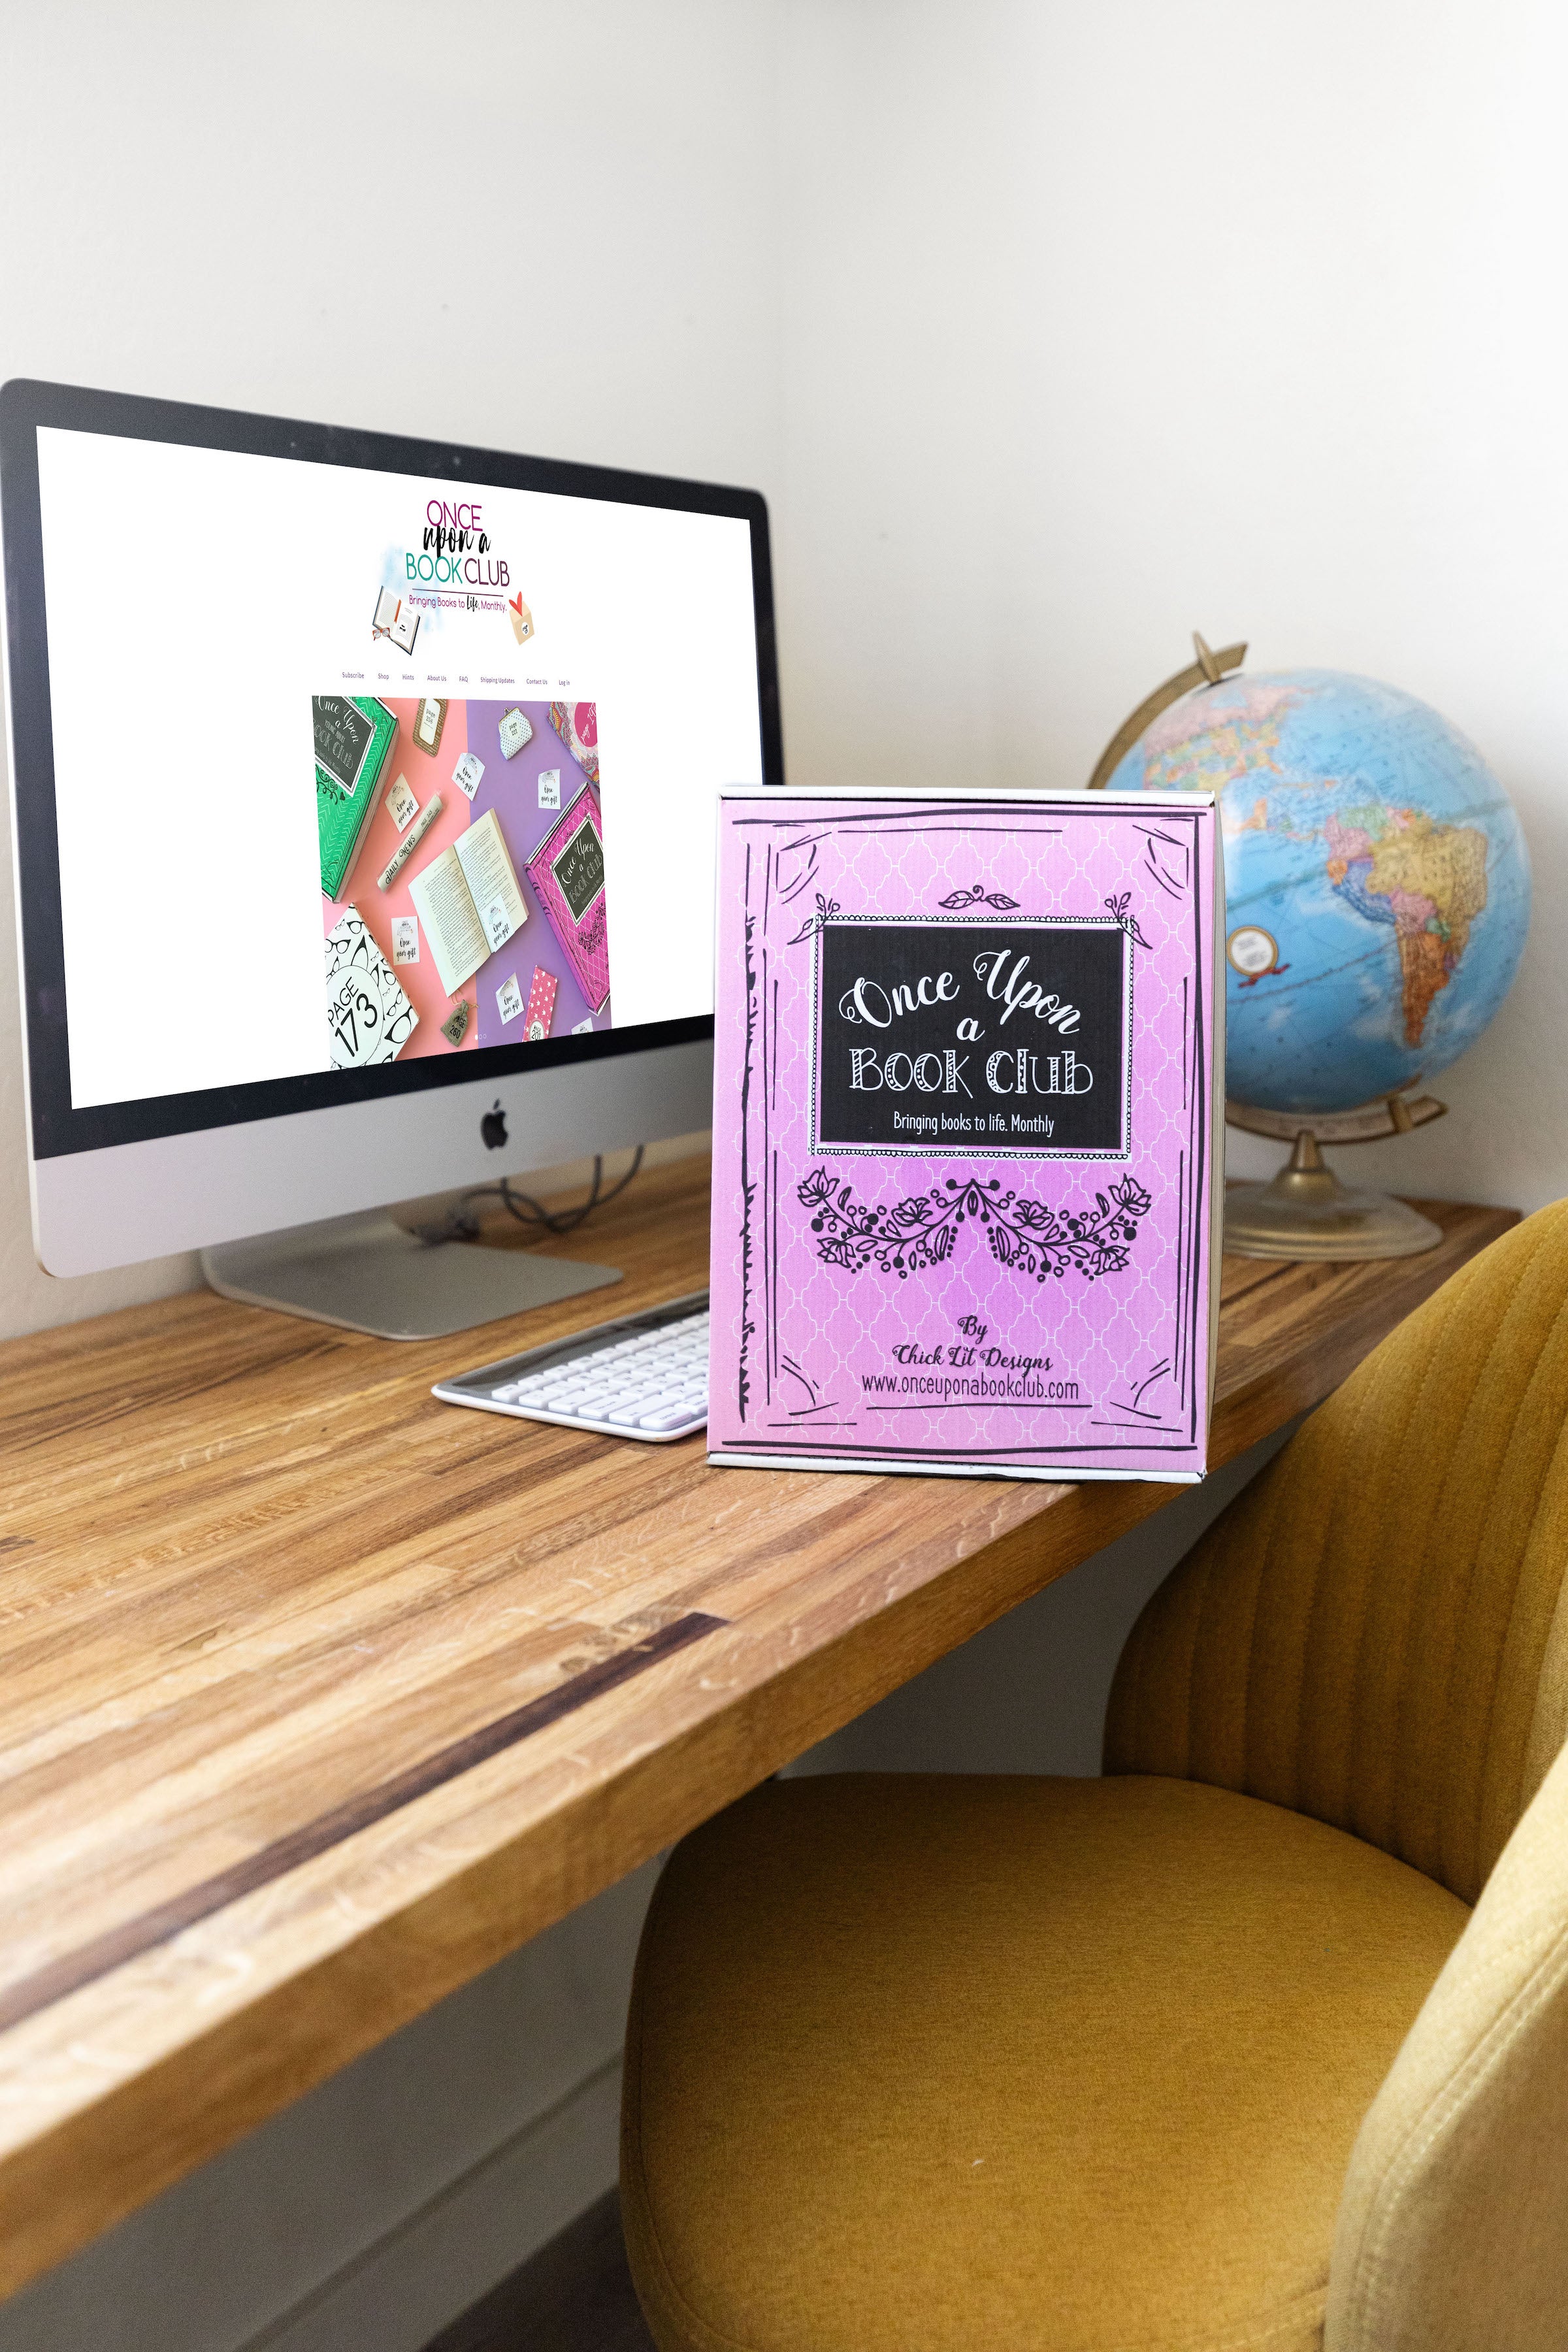 A pink Once Upon a Book Club box sits on a computer desk in front of a computer monitor. The monitor is displaying the Once Upon a Book Club website home page.